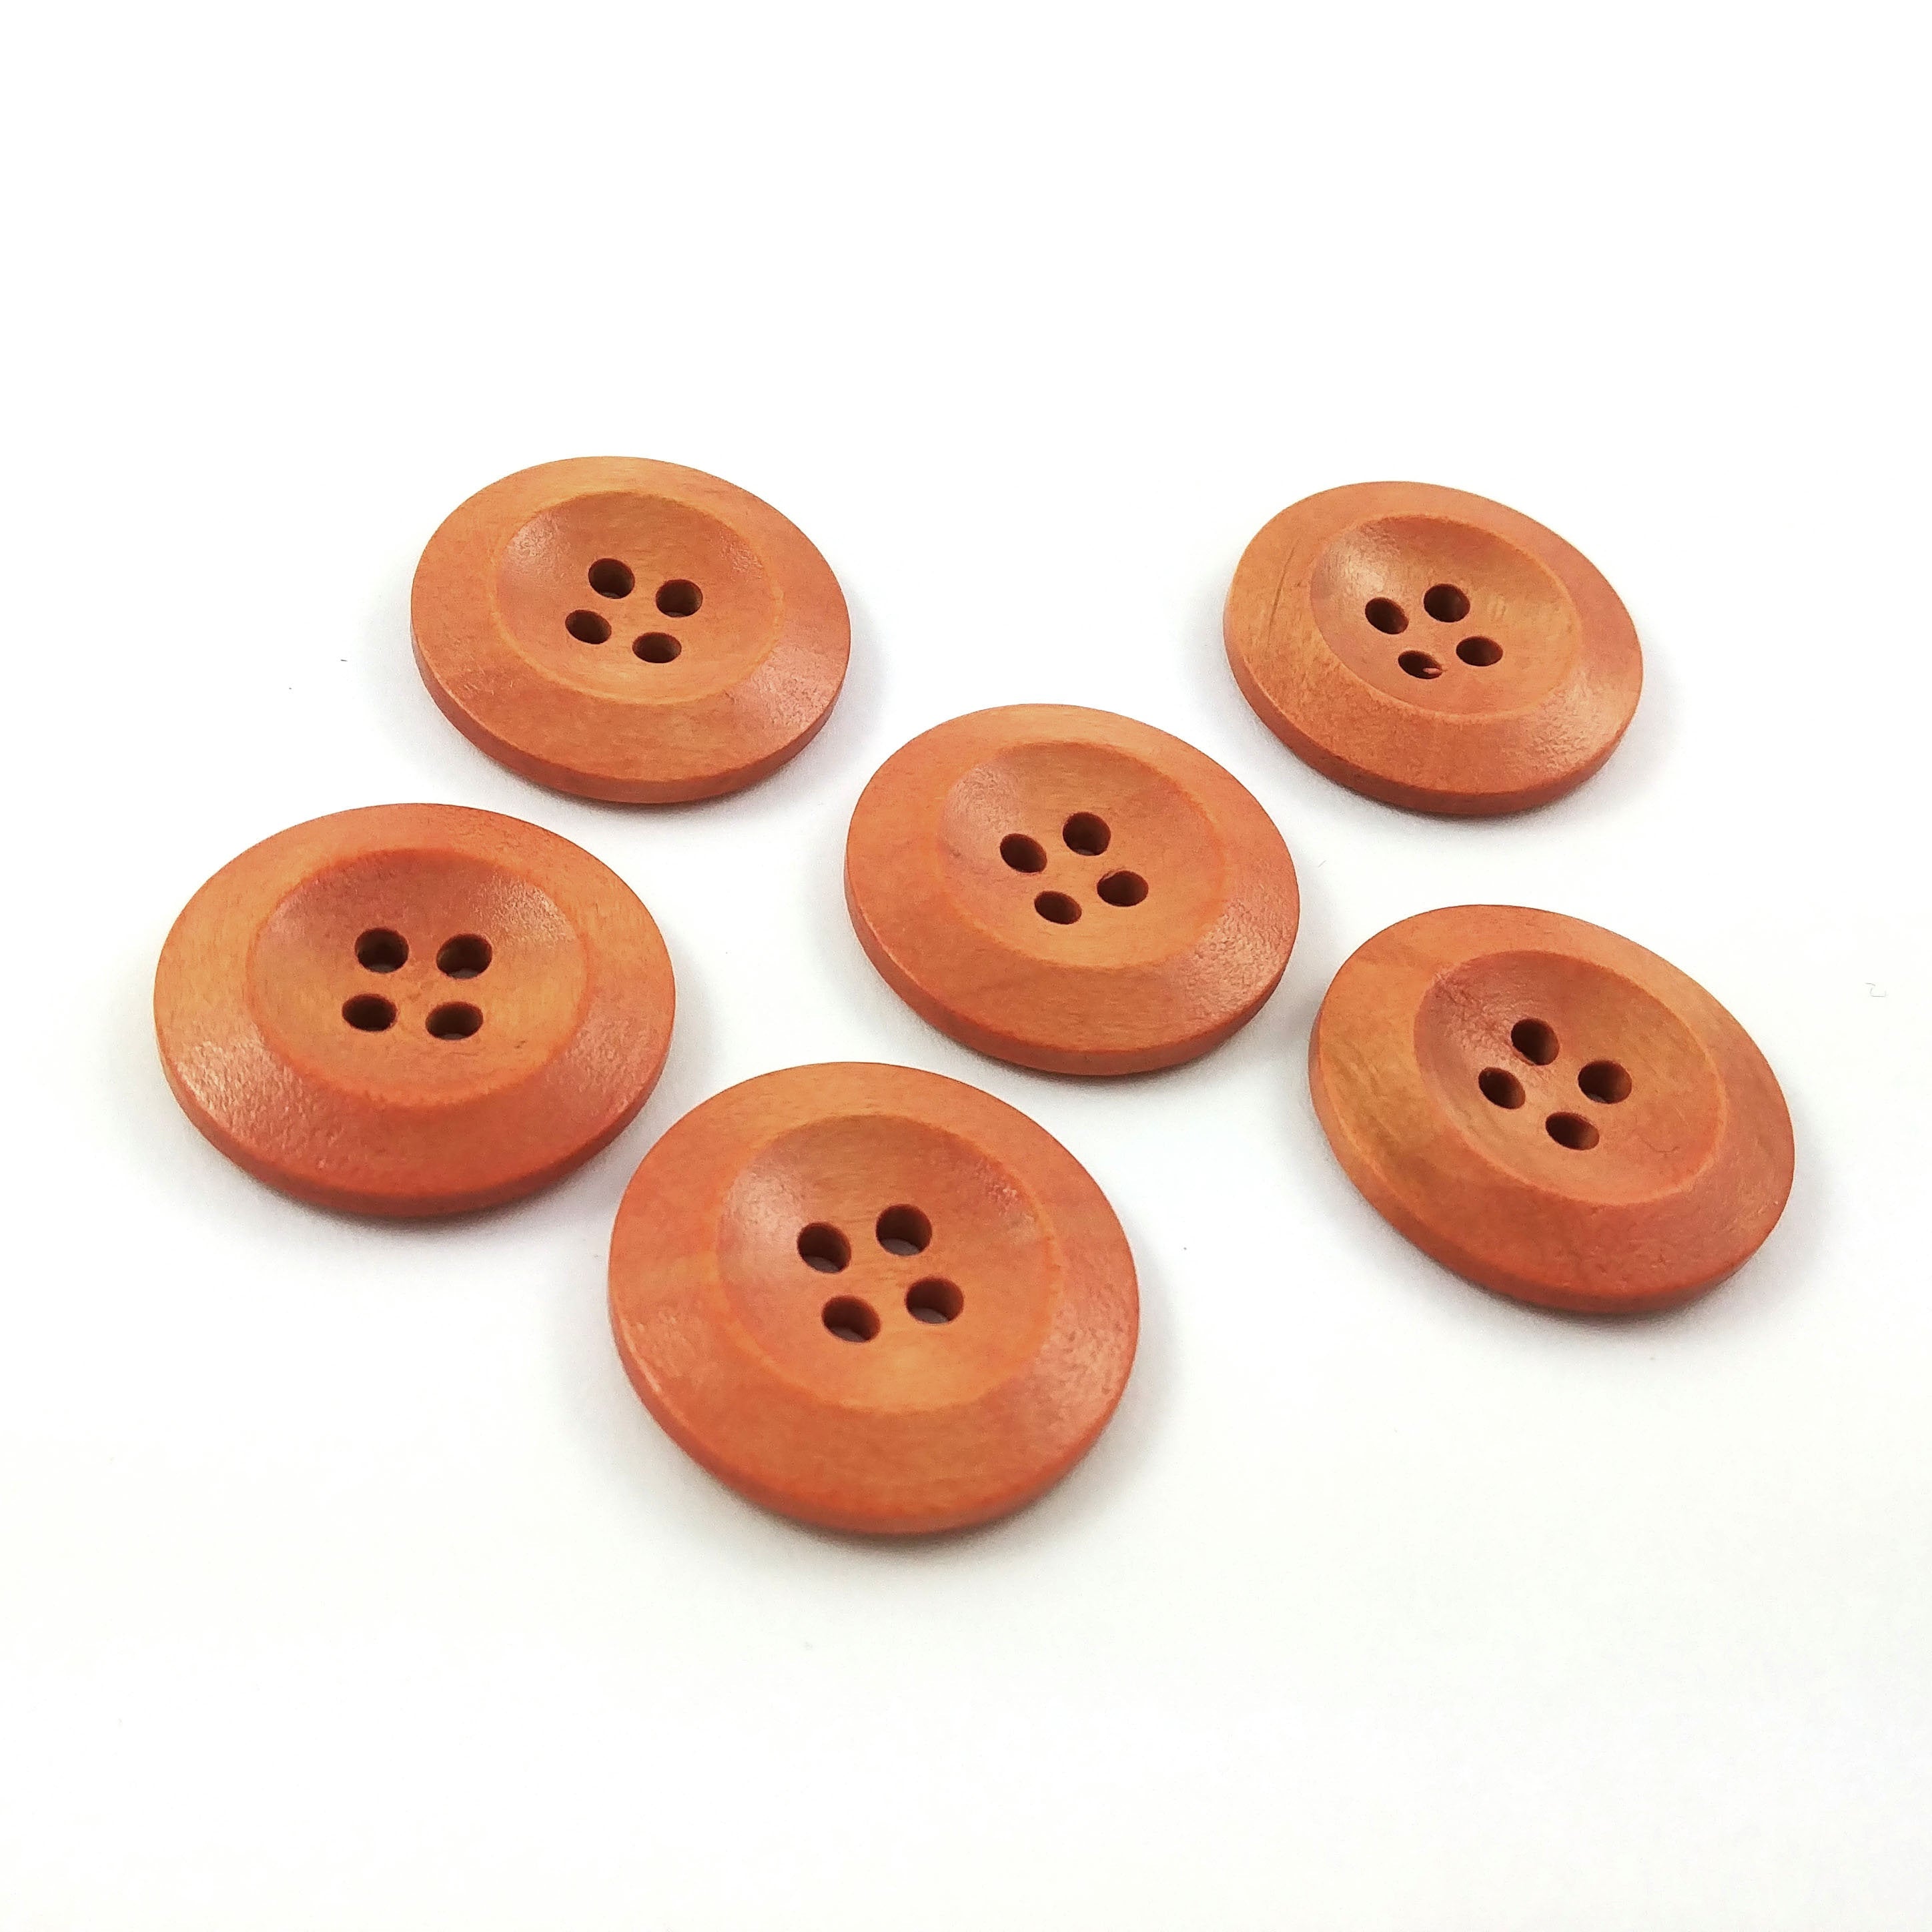 Wooden Sewing Buttons 28mm - set of 6 natural wood button - 6 colors available